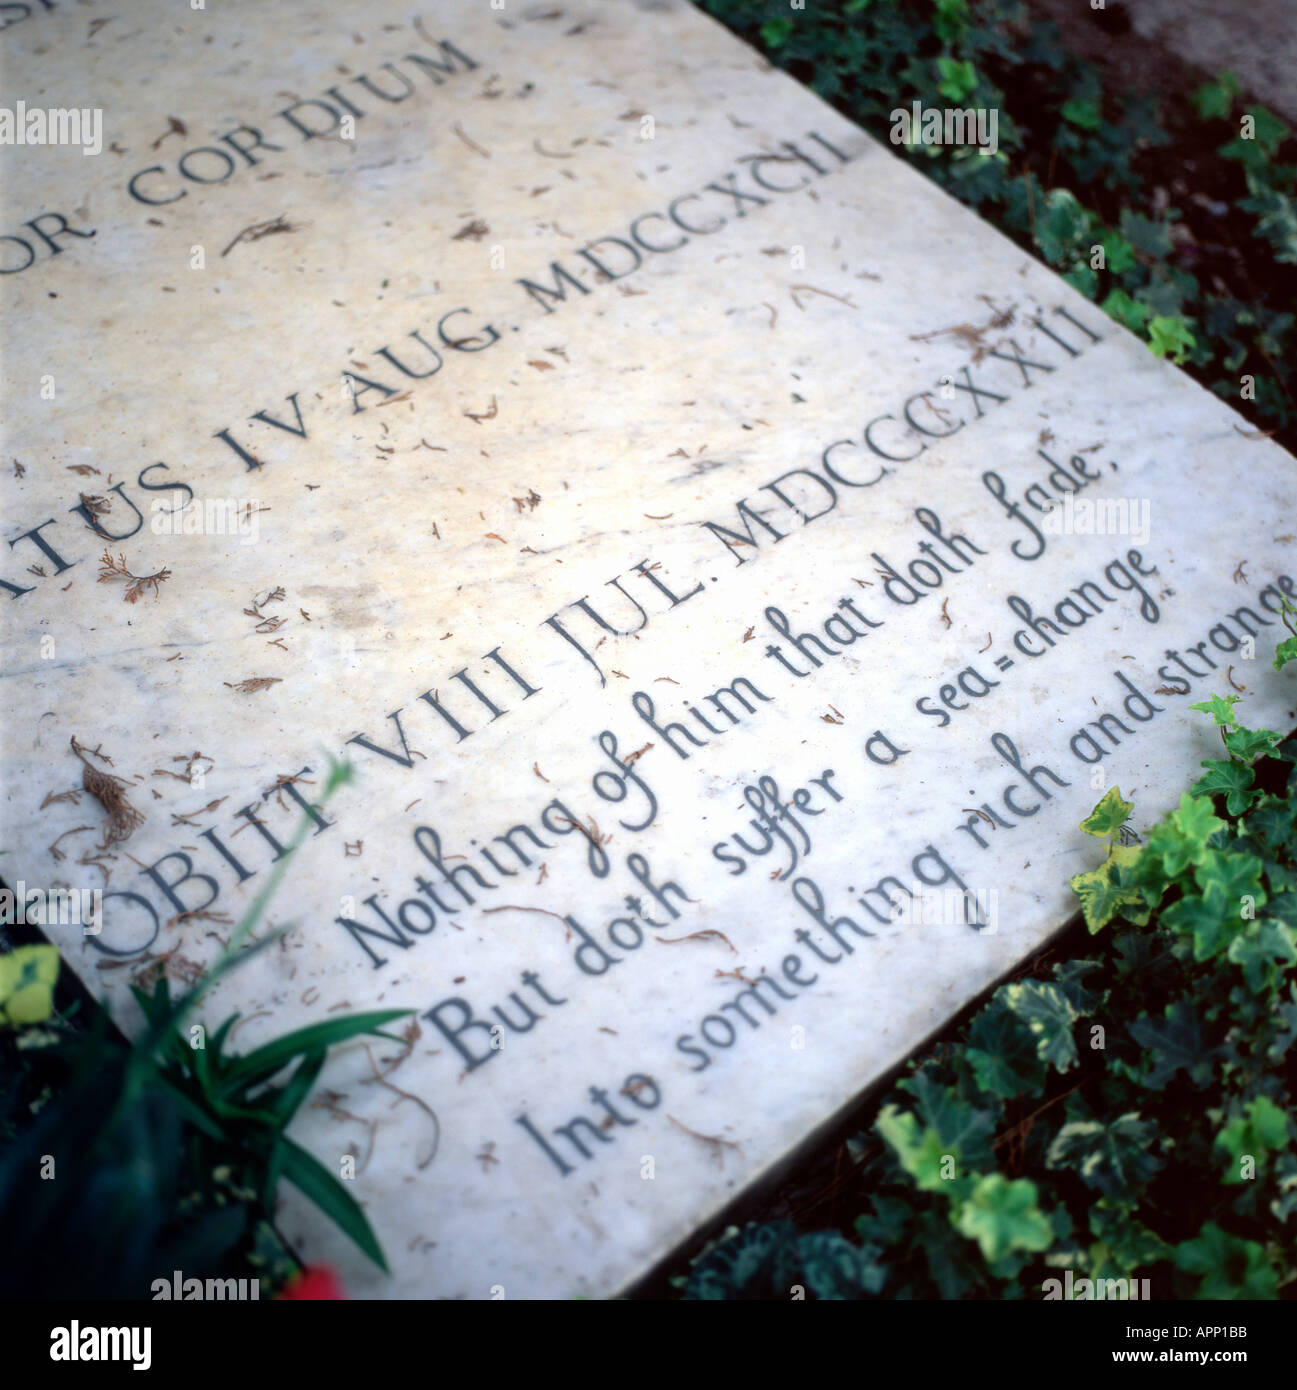 The gravestone of English poet Percy Bysshe Shelley in the Protestant Cemetery in Rome Italy Stock Photo